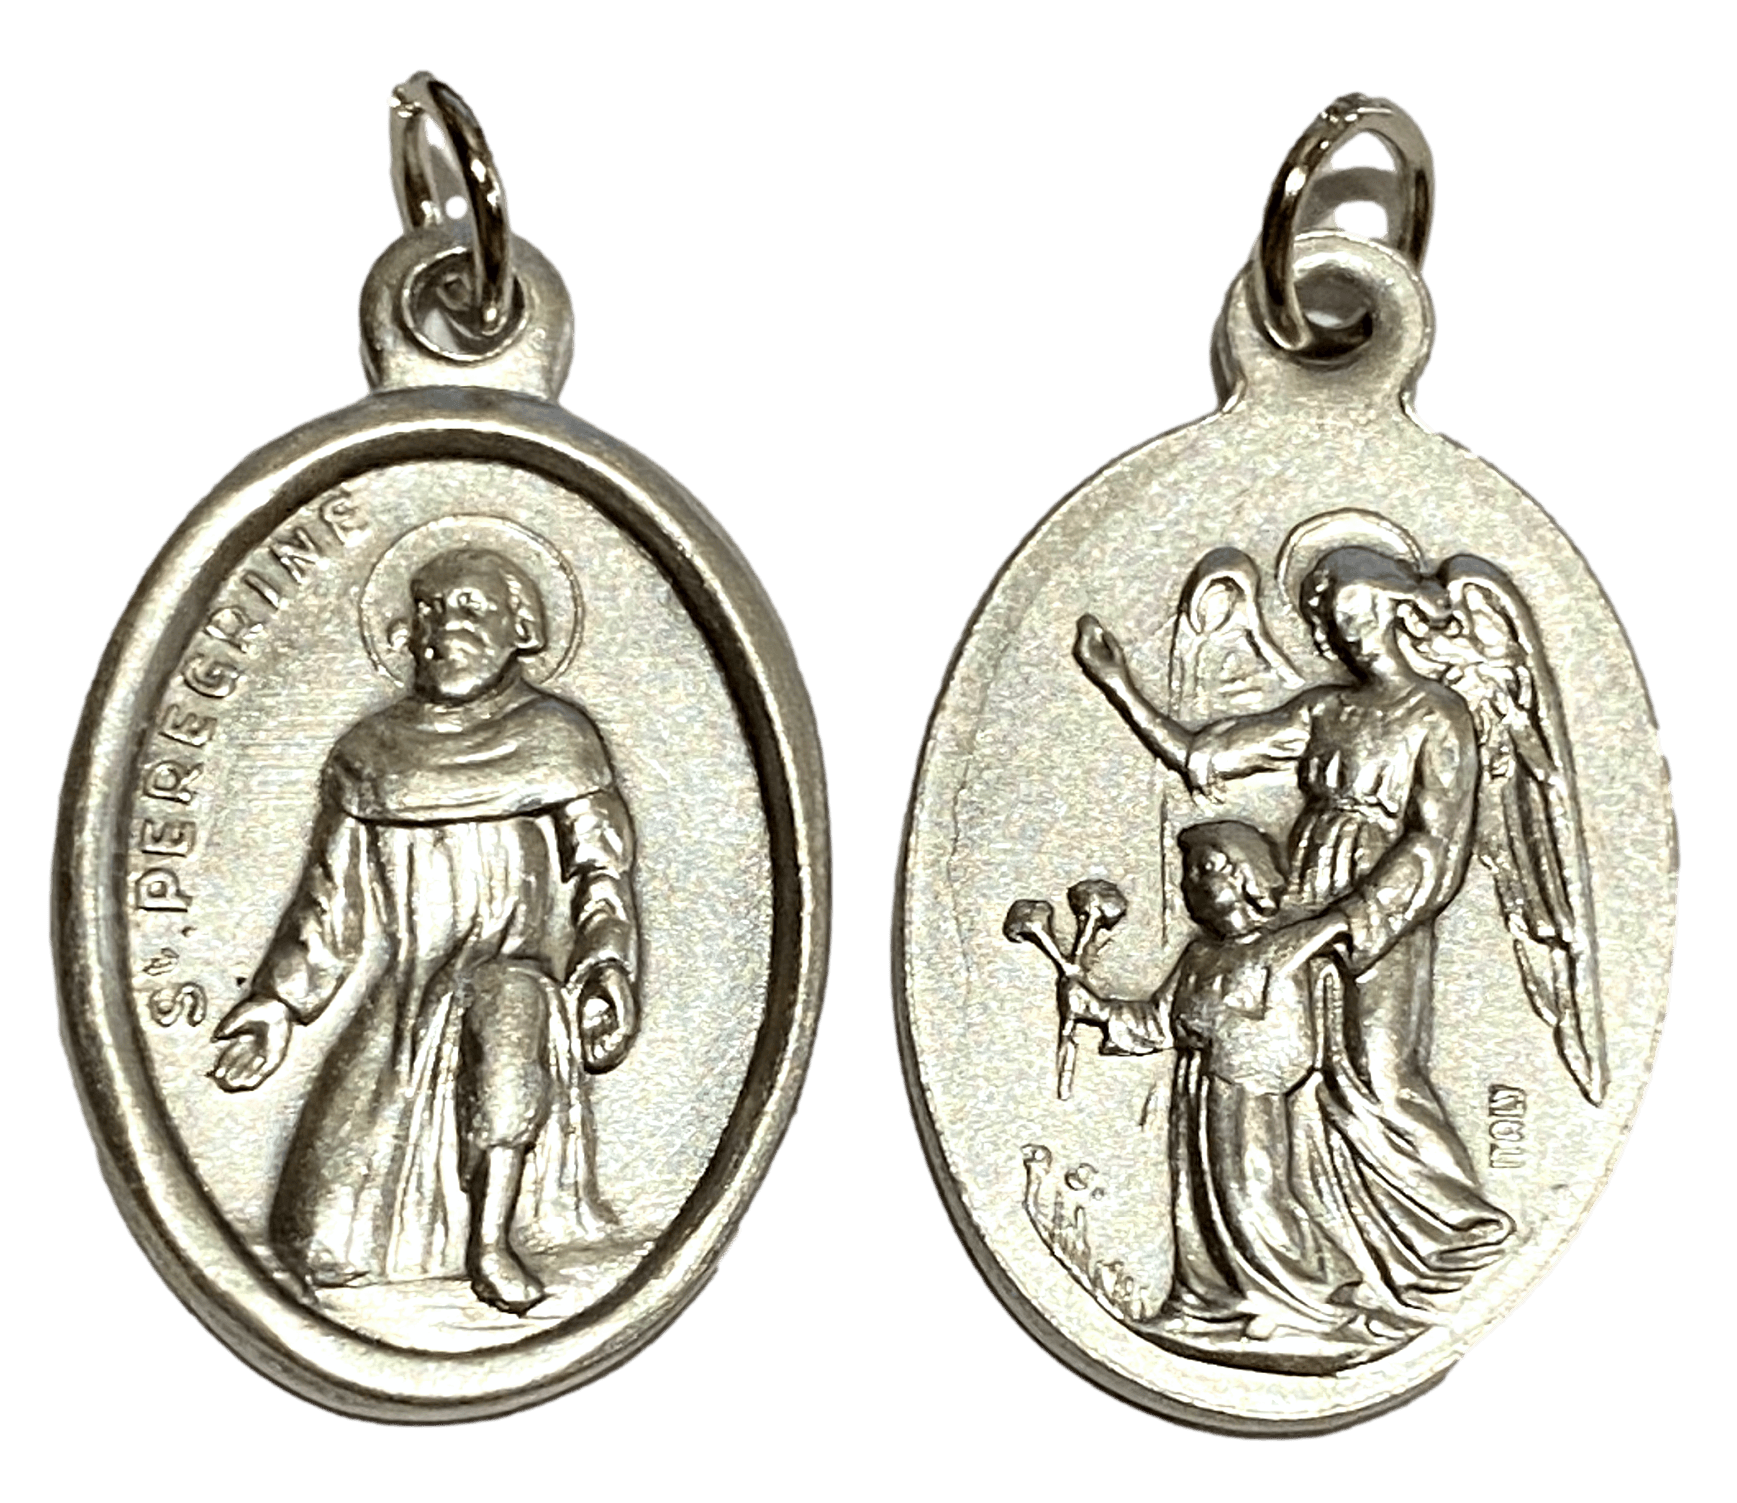 Medal Saint Peregrine Guardian Angel Italian Double-Sided Silver Oxidized Metal Alloy 1 inch - Ysleta Mission Gift Shop- VOTED El Paso's Best Gift Shop